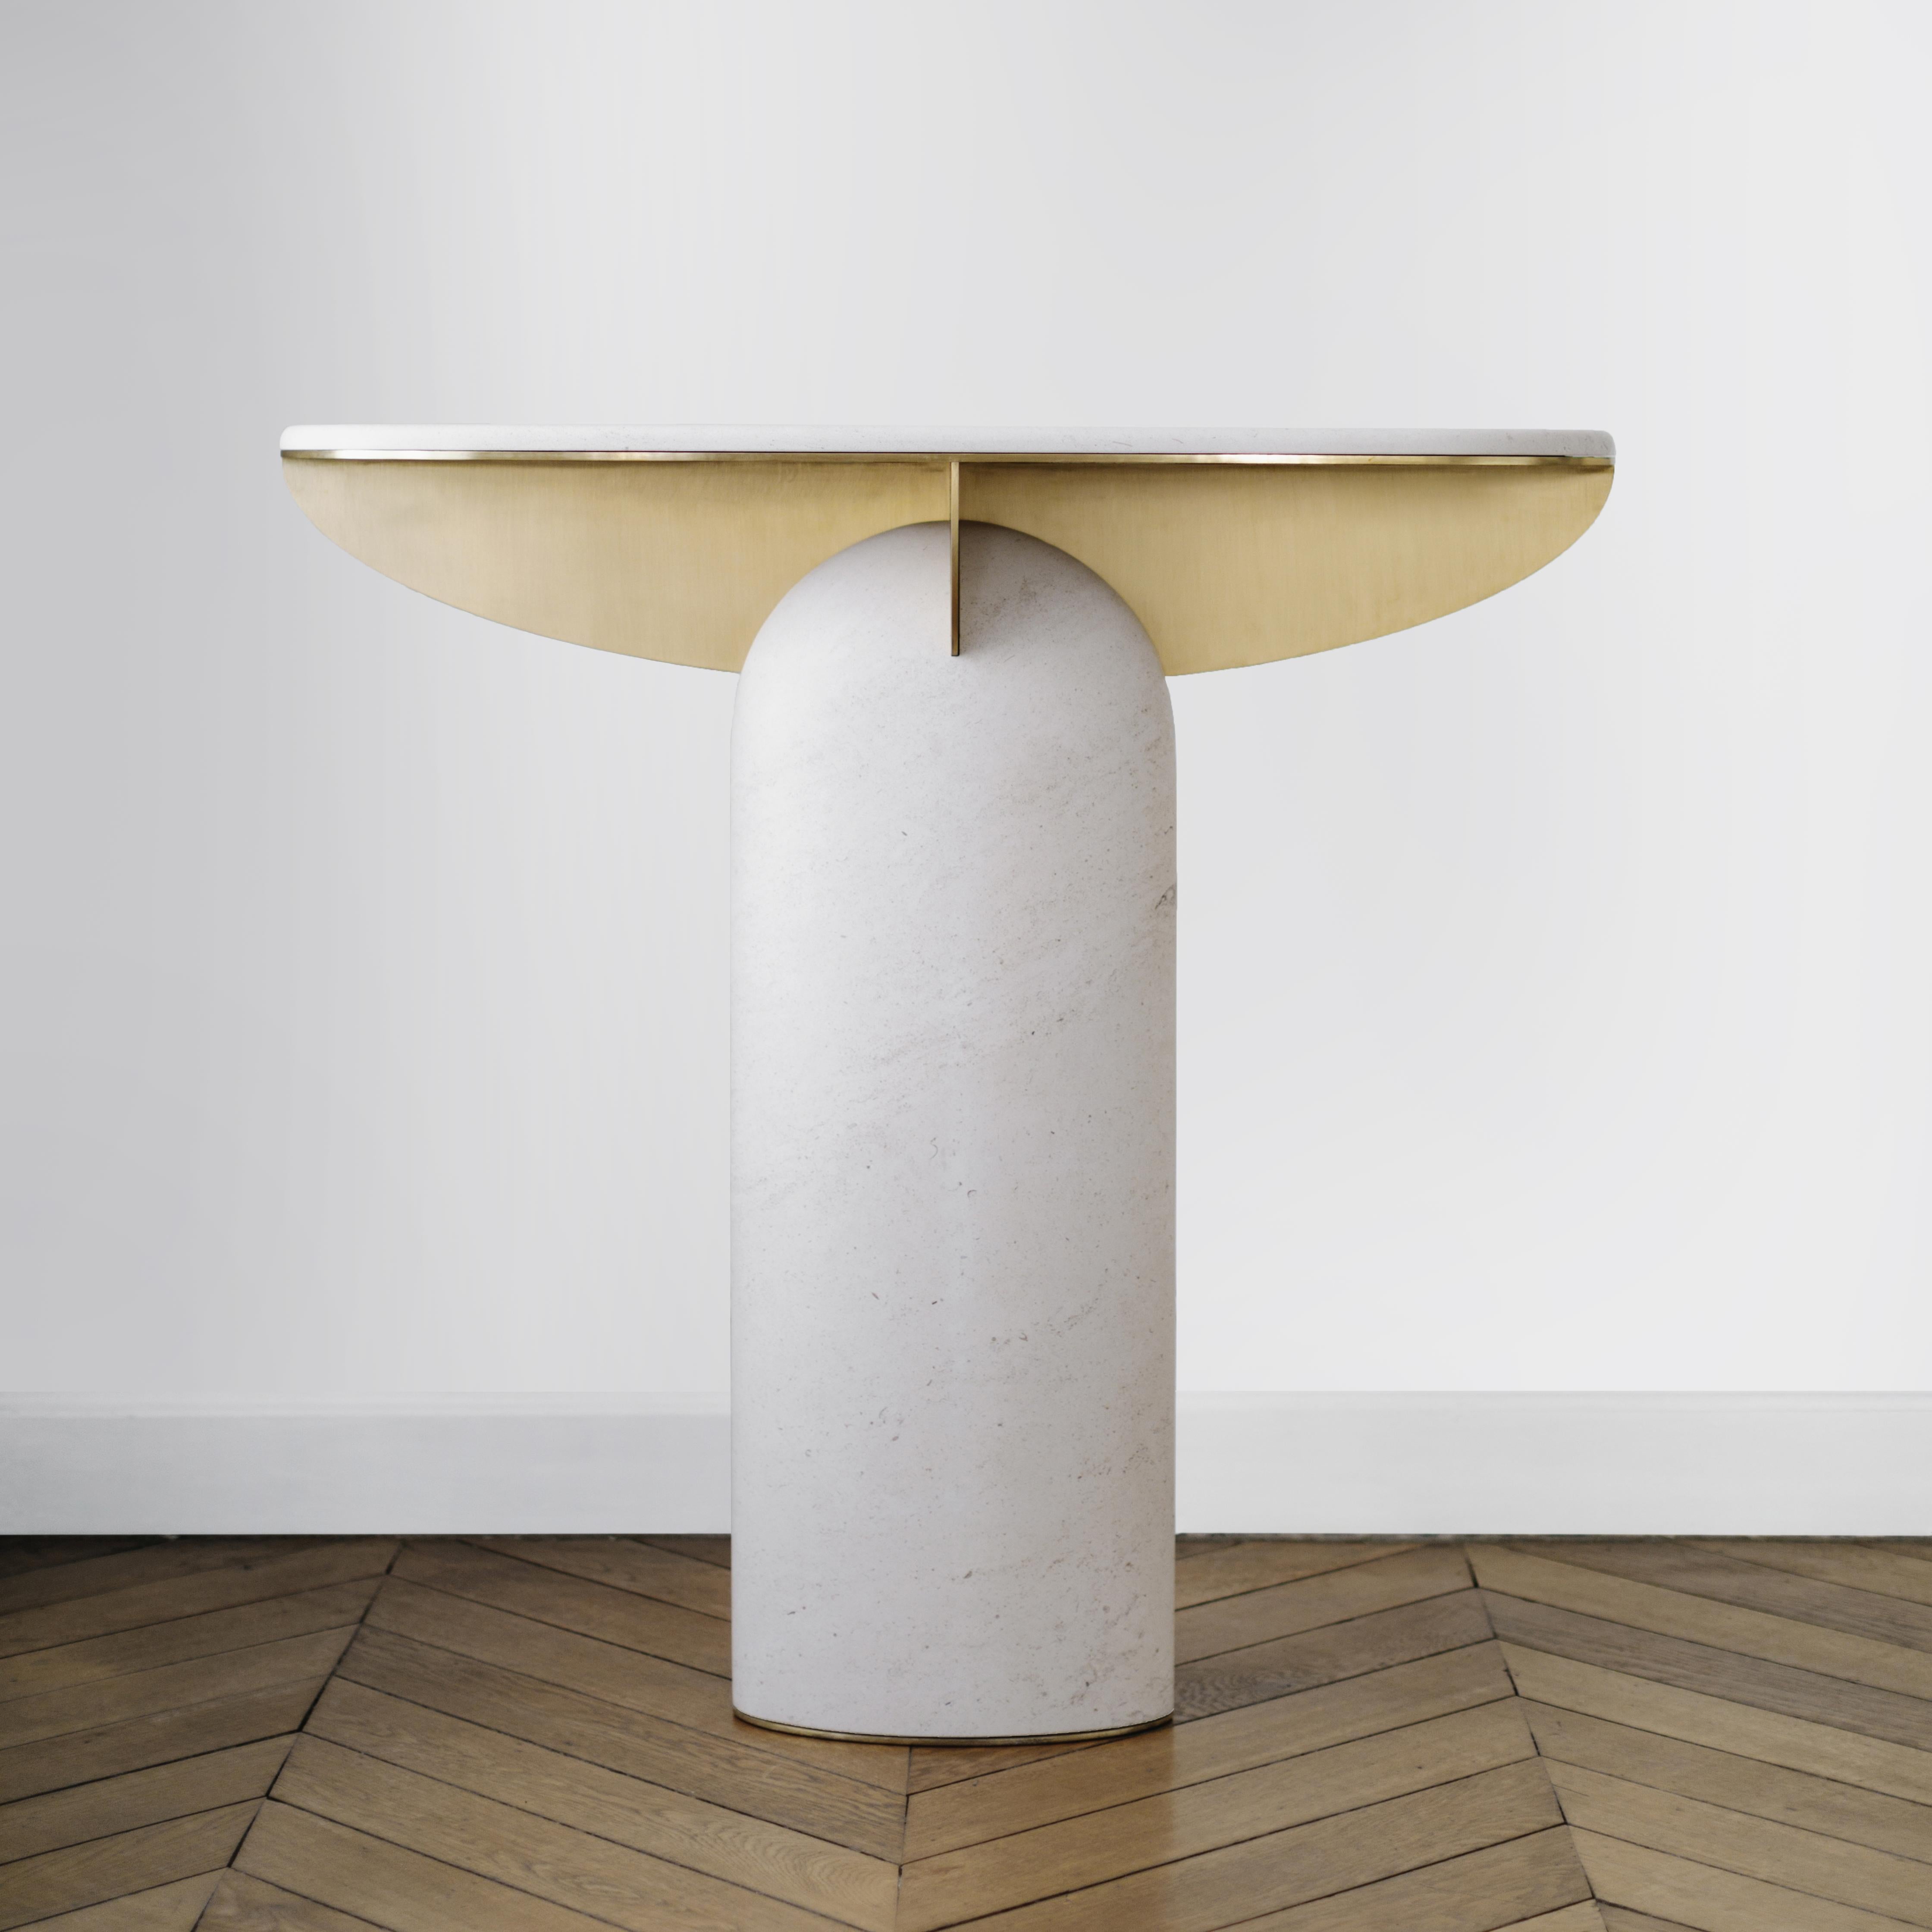 Brass and limestone console 03, Fre´de´ric Saulou
Limited edition : 4 / 20
Frederic Saulou.
Materials: Ornemental Limestone Buffon and brushed brass.
Available with copper or black iron finishing.
Dimensions: L 110 x W 30 x H 97 cm
Weight : around